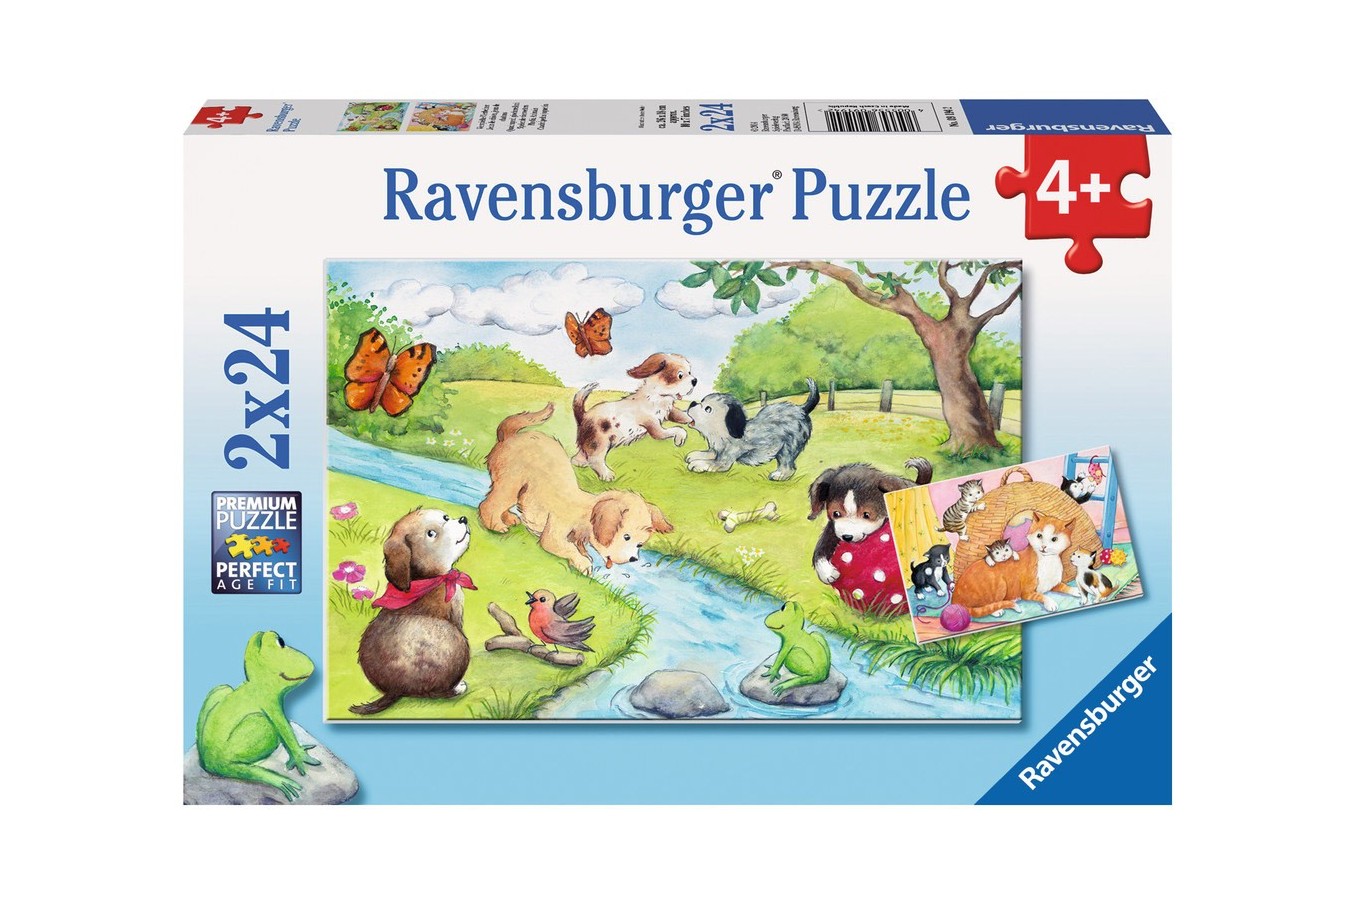 Puzzle Ravensburger - Animale Jucause, 2x24 piese (09194)